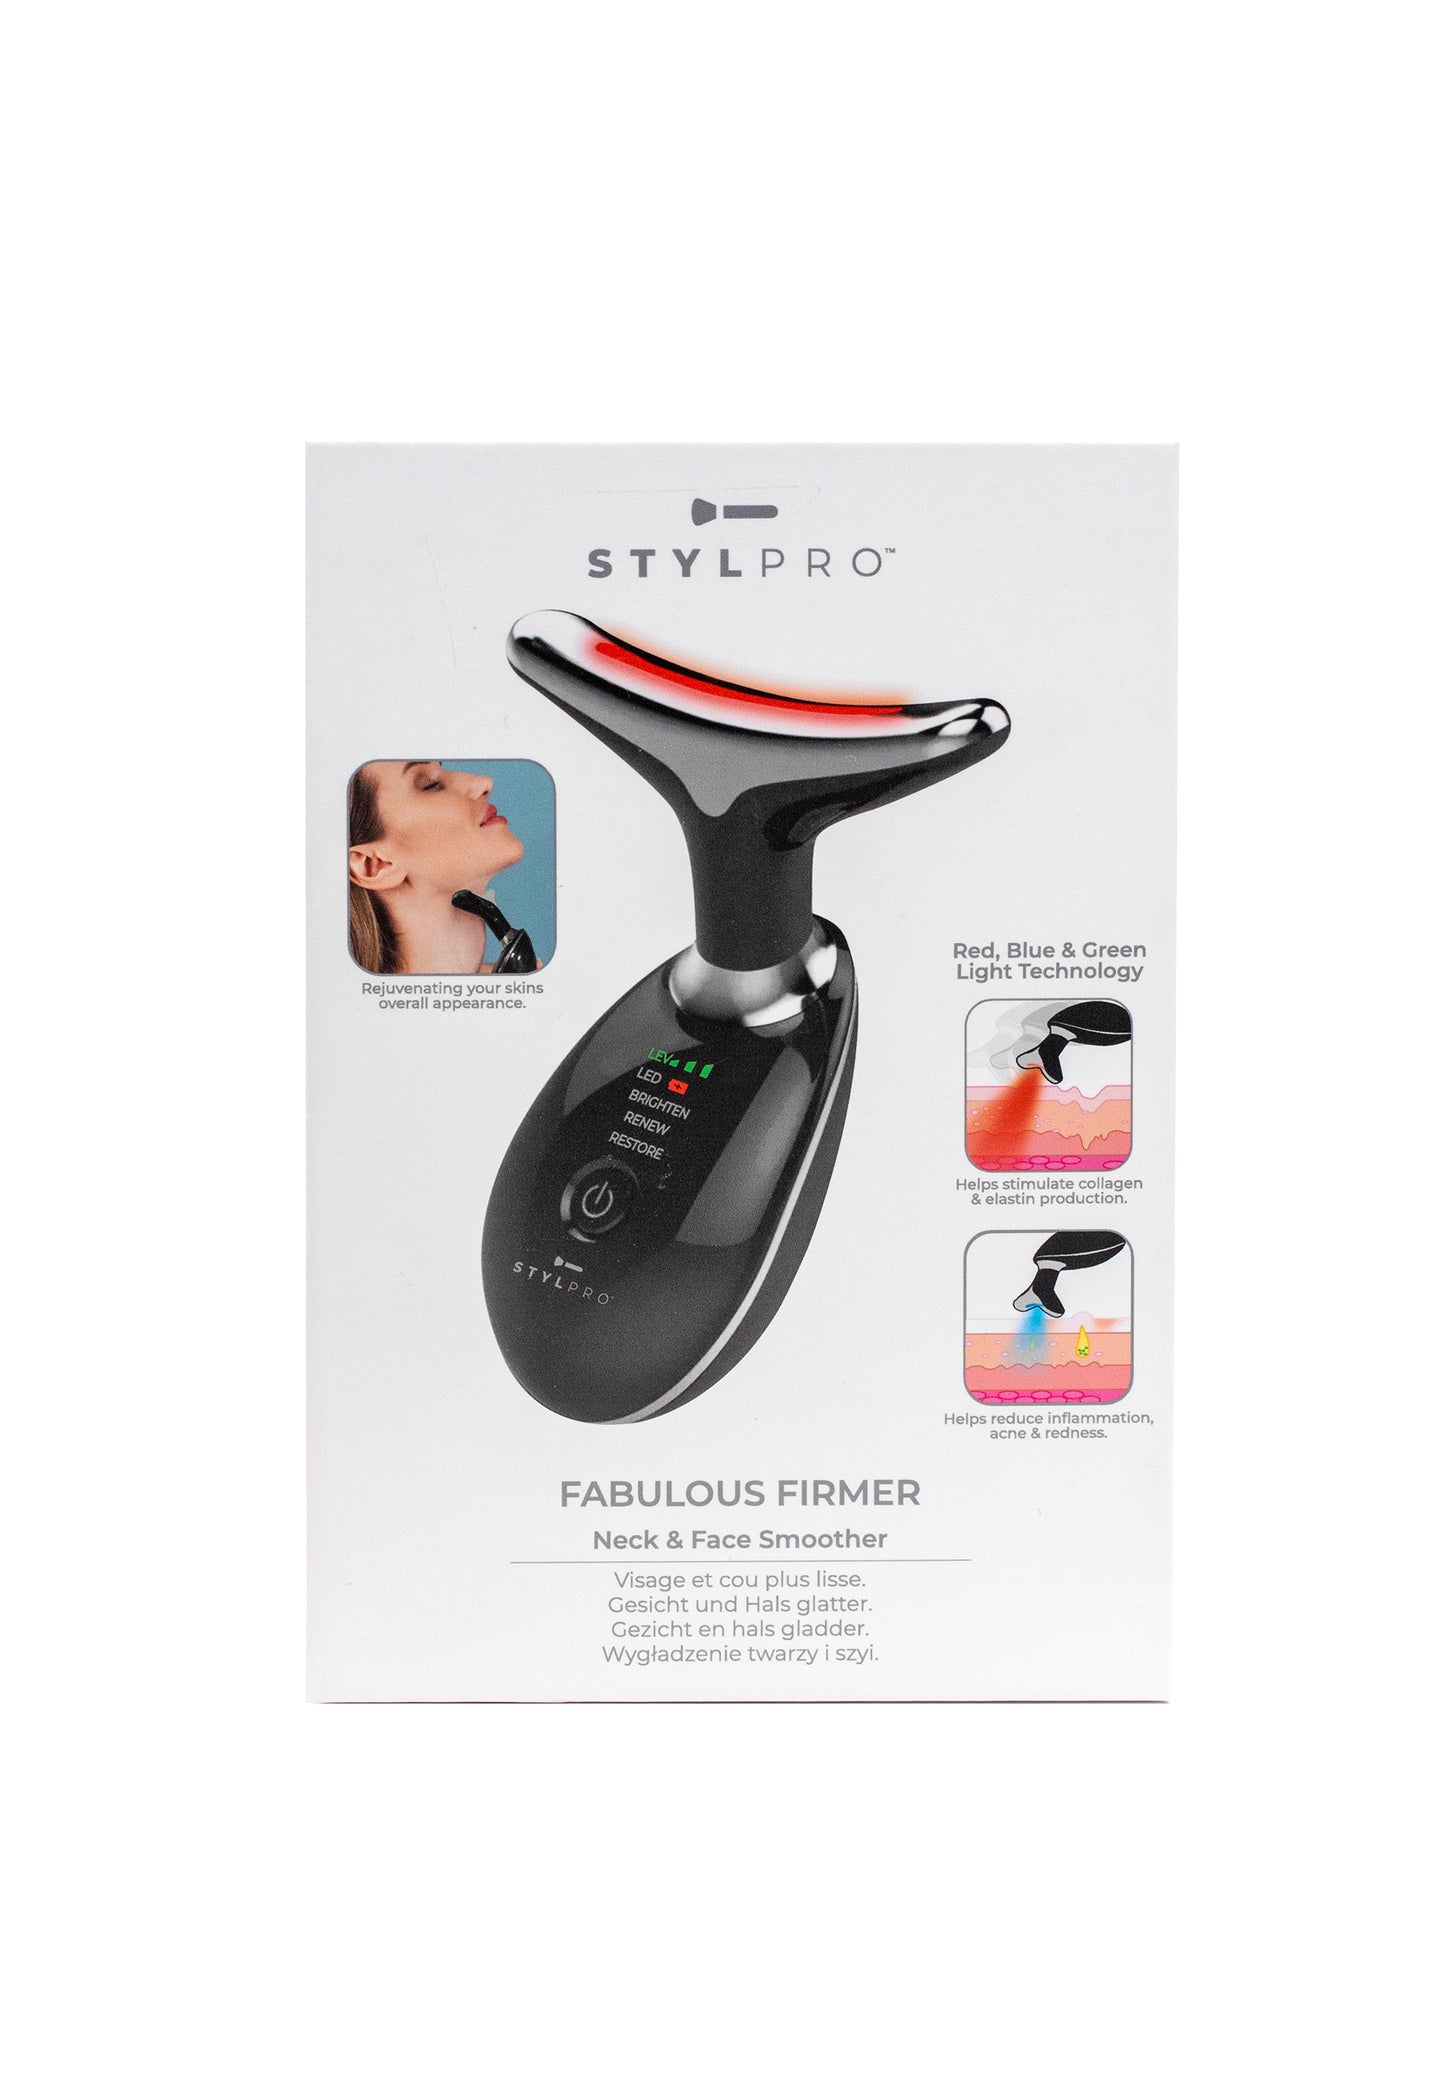 Fabulous Firmer Neck & Face Smoother